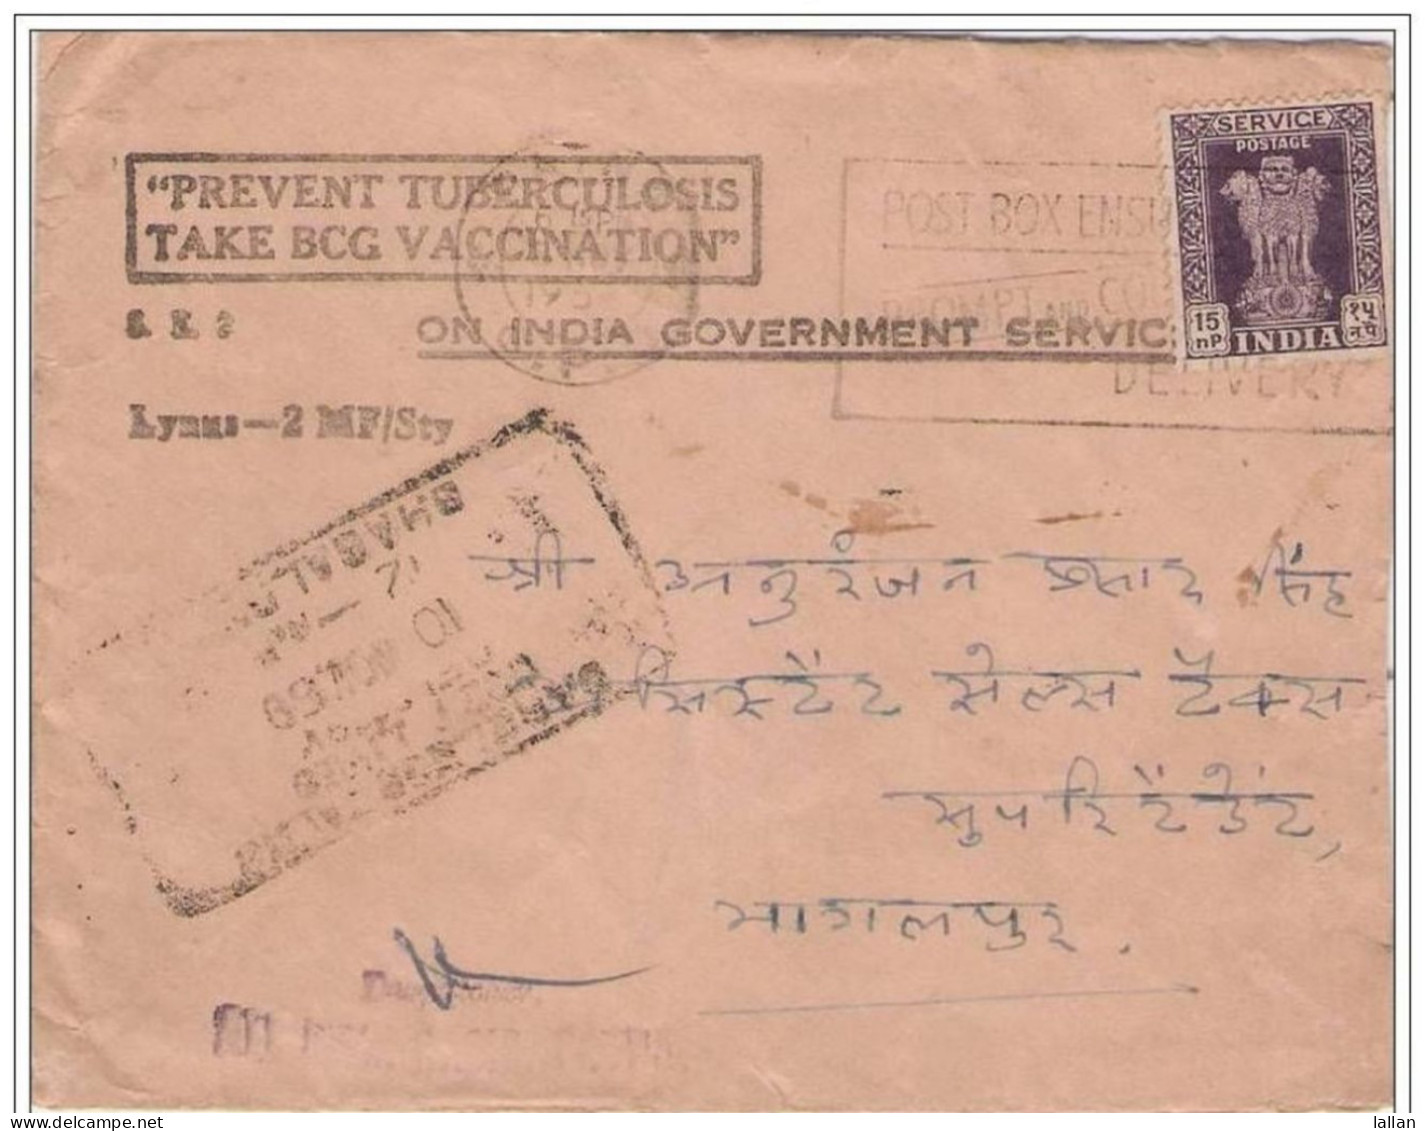 "PREVENT TUBERCULOSIS TAKE BCG VACCINATION"-Slogan In Bold, Govt Of India Envelope Only For Govt. Use,Rare, 1960LPS1 - Maladies